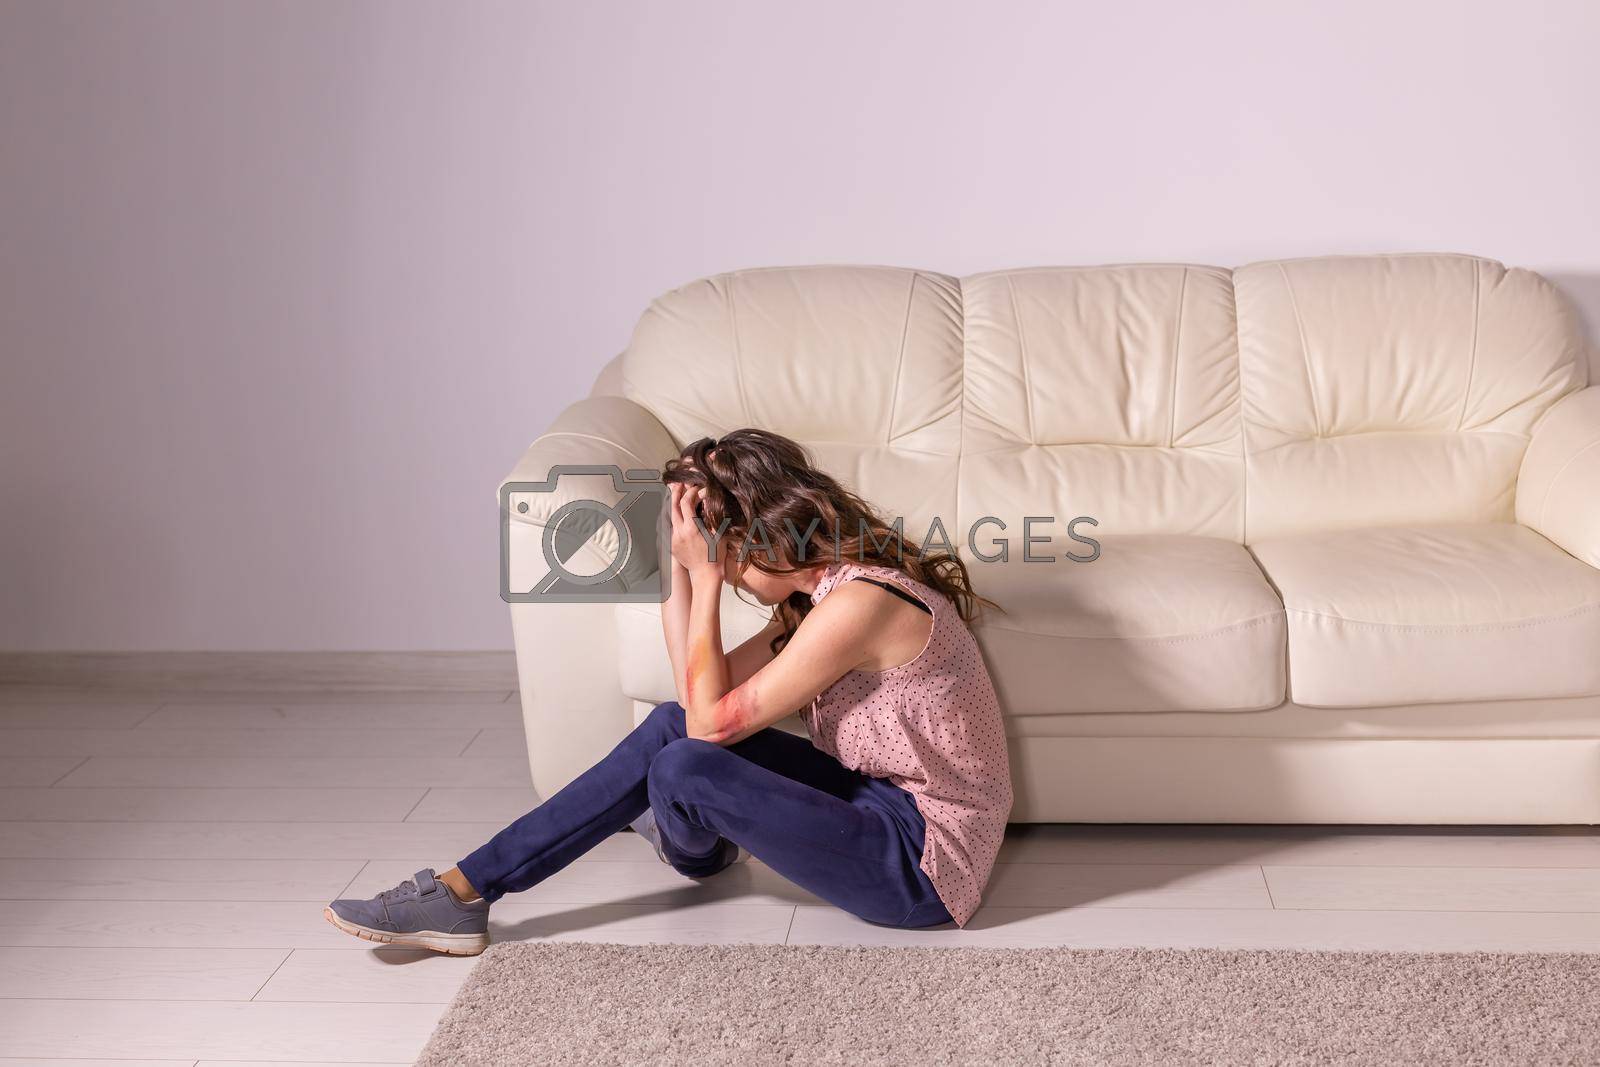 Royalty free image of Victim, abuse and domestic violence - Woman crying, suffering domestic violence by Satura86